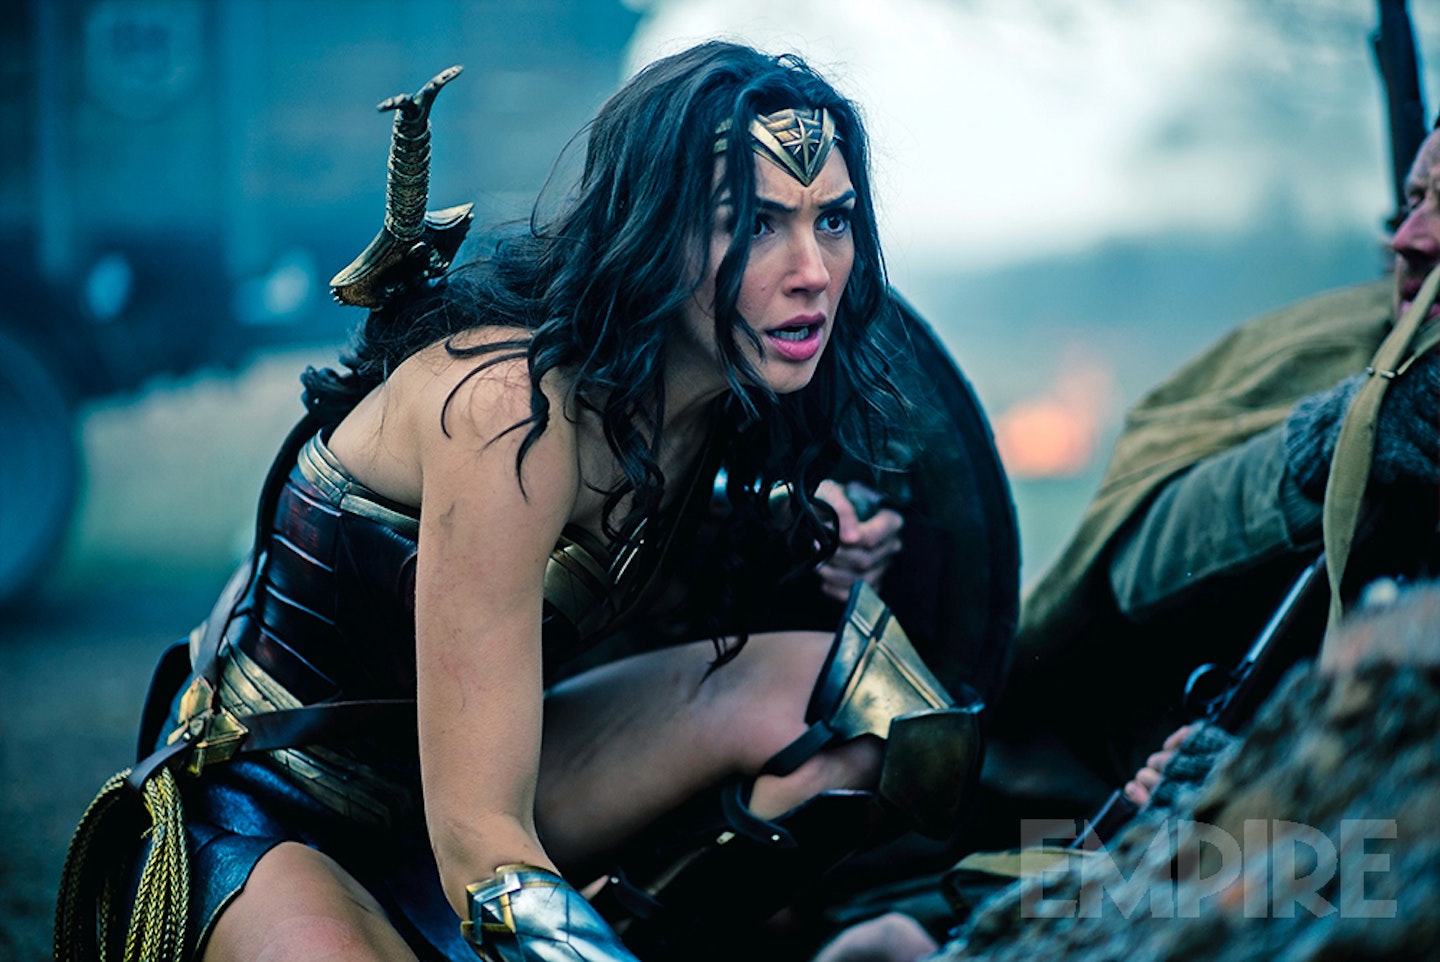 Wonder Woman Review: Truth, Justice, and the ian Way